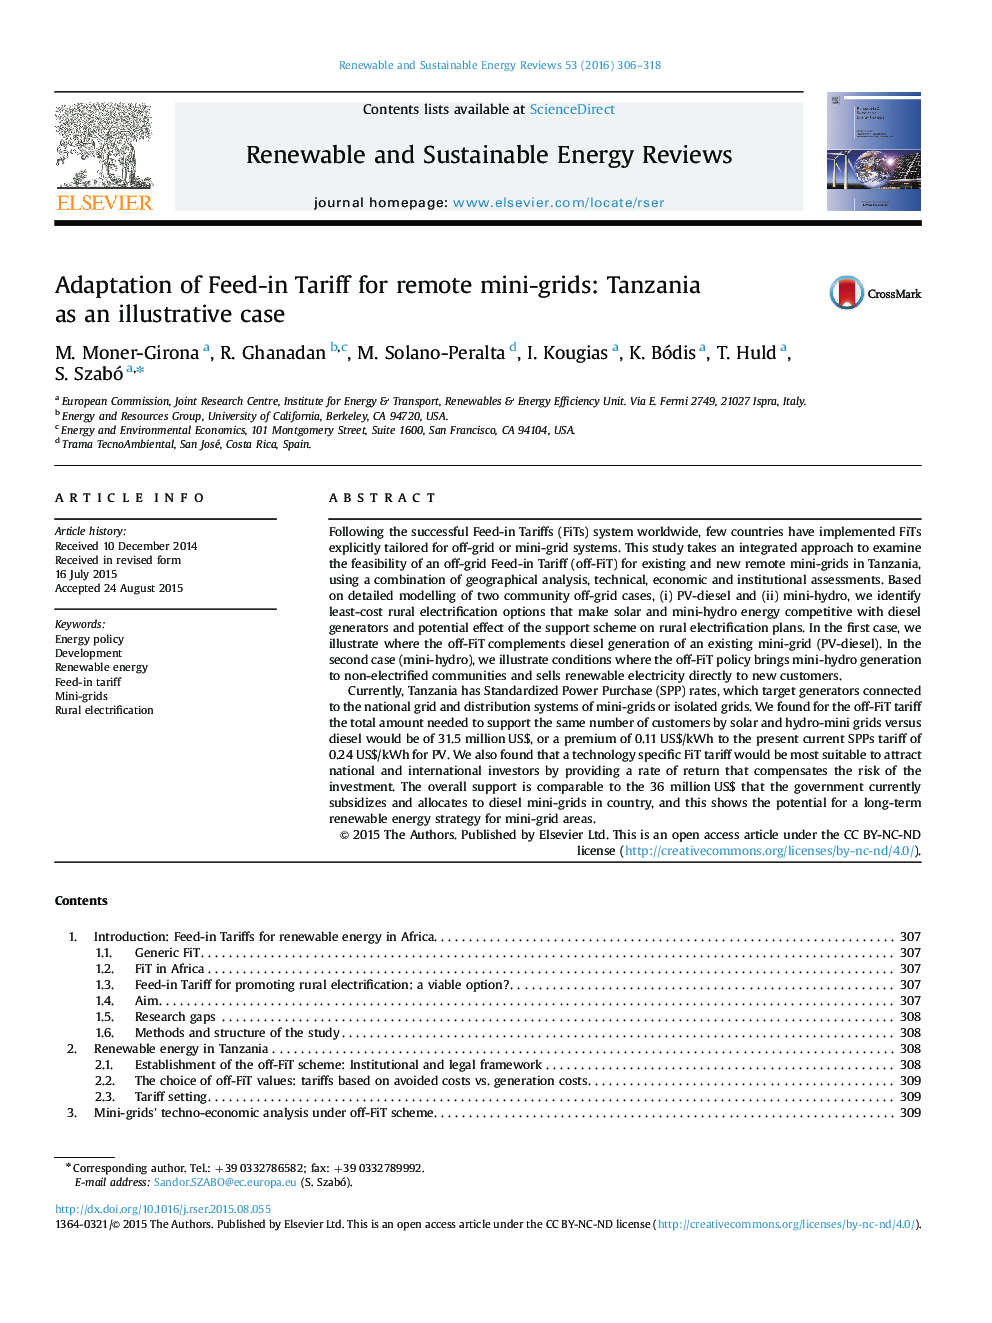 Adaptation of Feed-in Tariff for remote mini-grids: Tanzania as an illustrative case